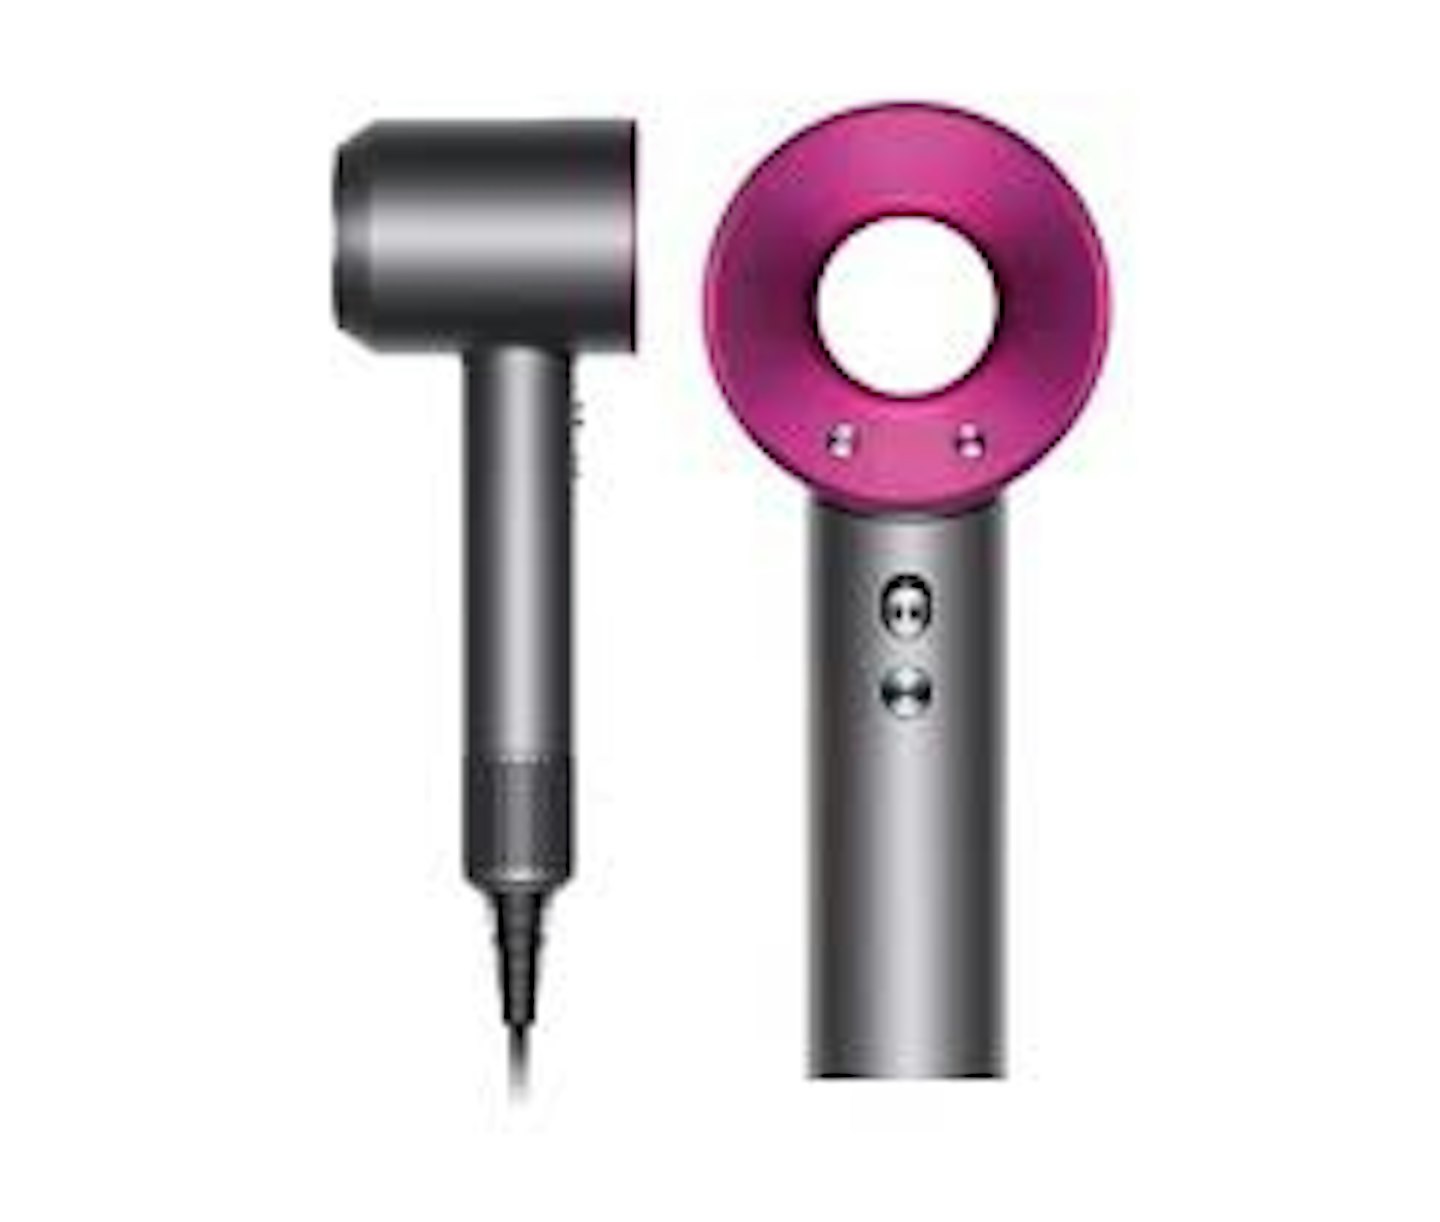 Dyson Supersonic Hairdryer, £299.99